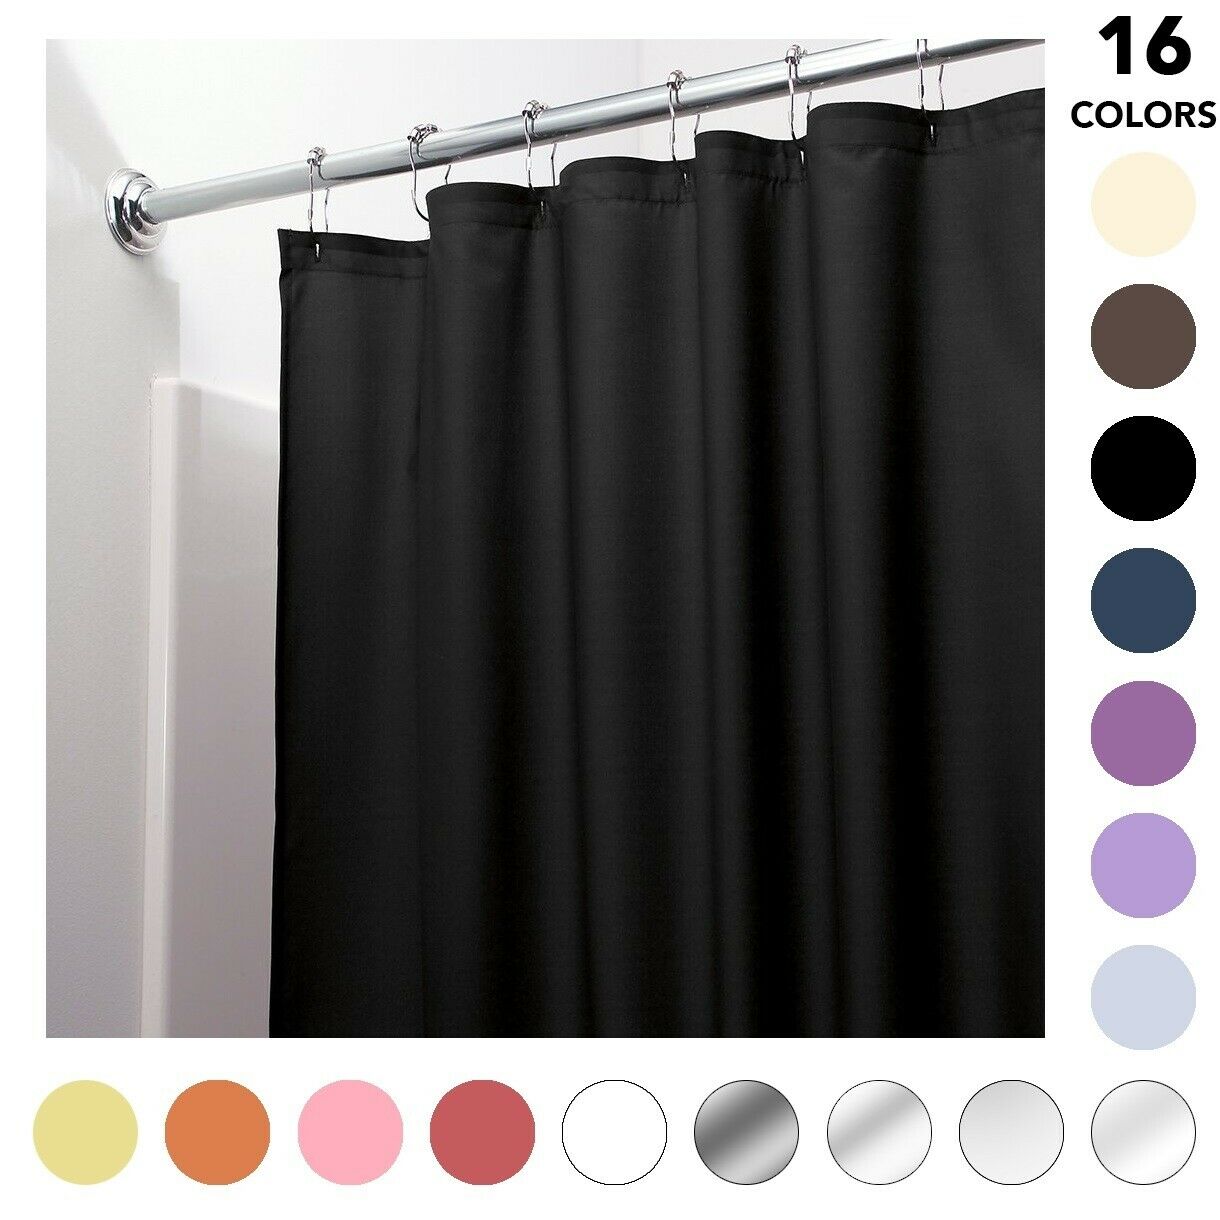 Heavy Duty Mildew Free Vinyl Waterproof Shower Curtain Liner With Magnets New